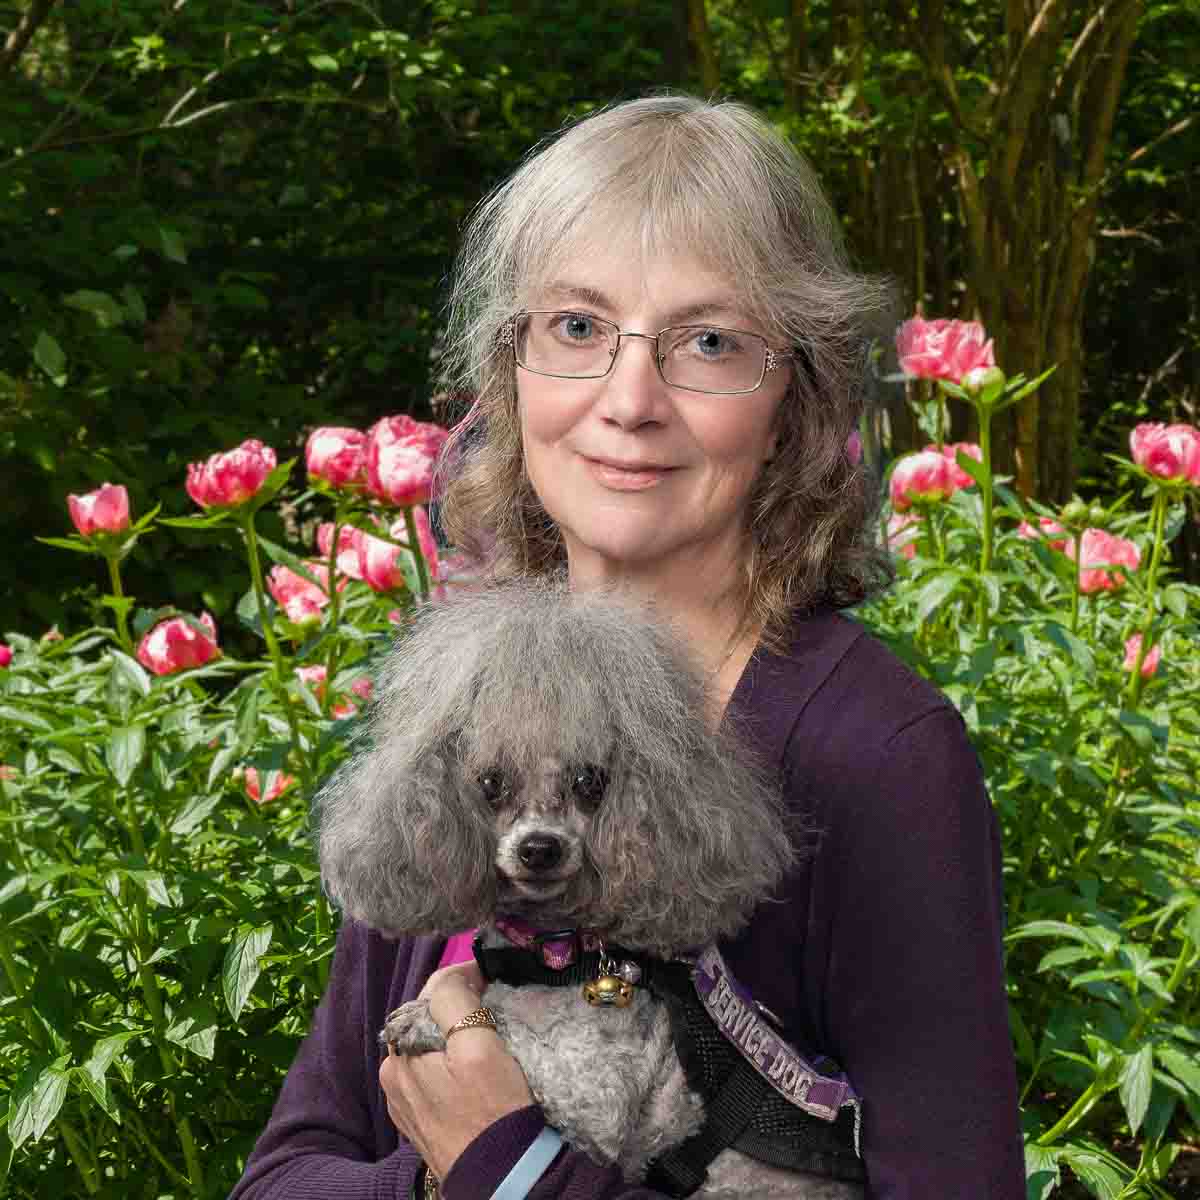 A woman holding her dog in front of some bushes